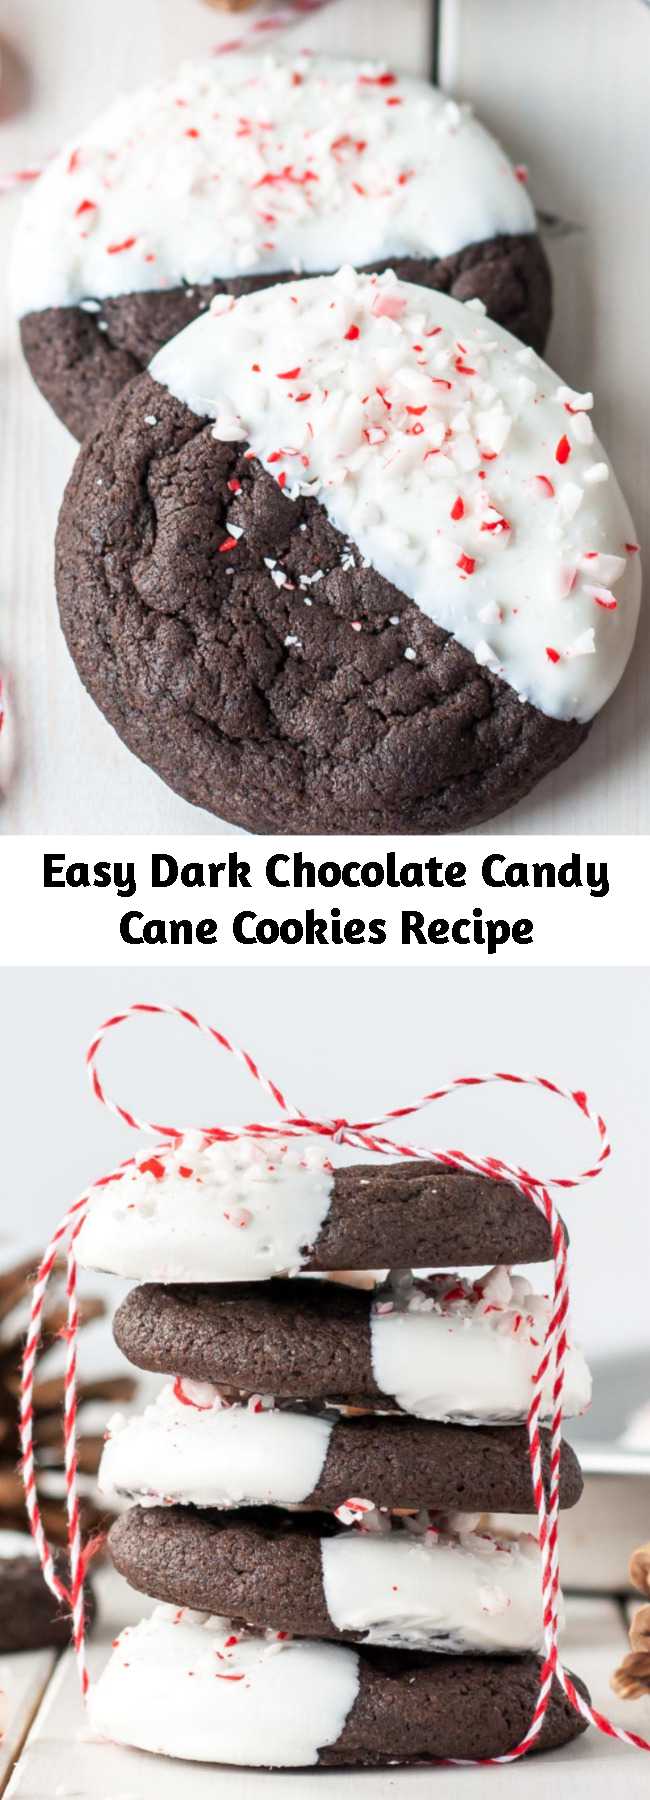 Easy Dark Chocolate Candy Cane Cookies Recipe - The classic combination of chocolate and peppermint make these Dark Chocolate Candy Cane Cookies the perfect treat for the holidays!